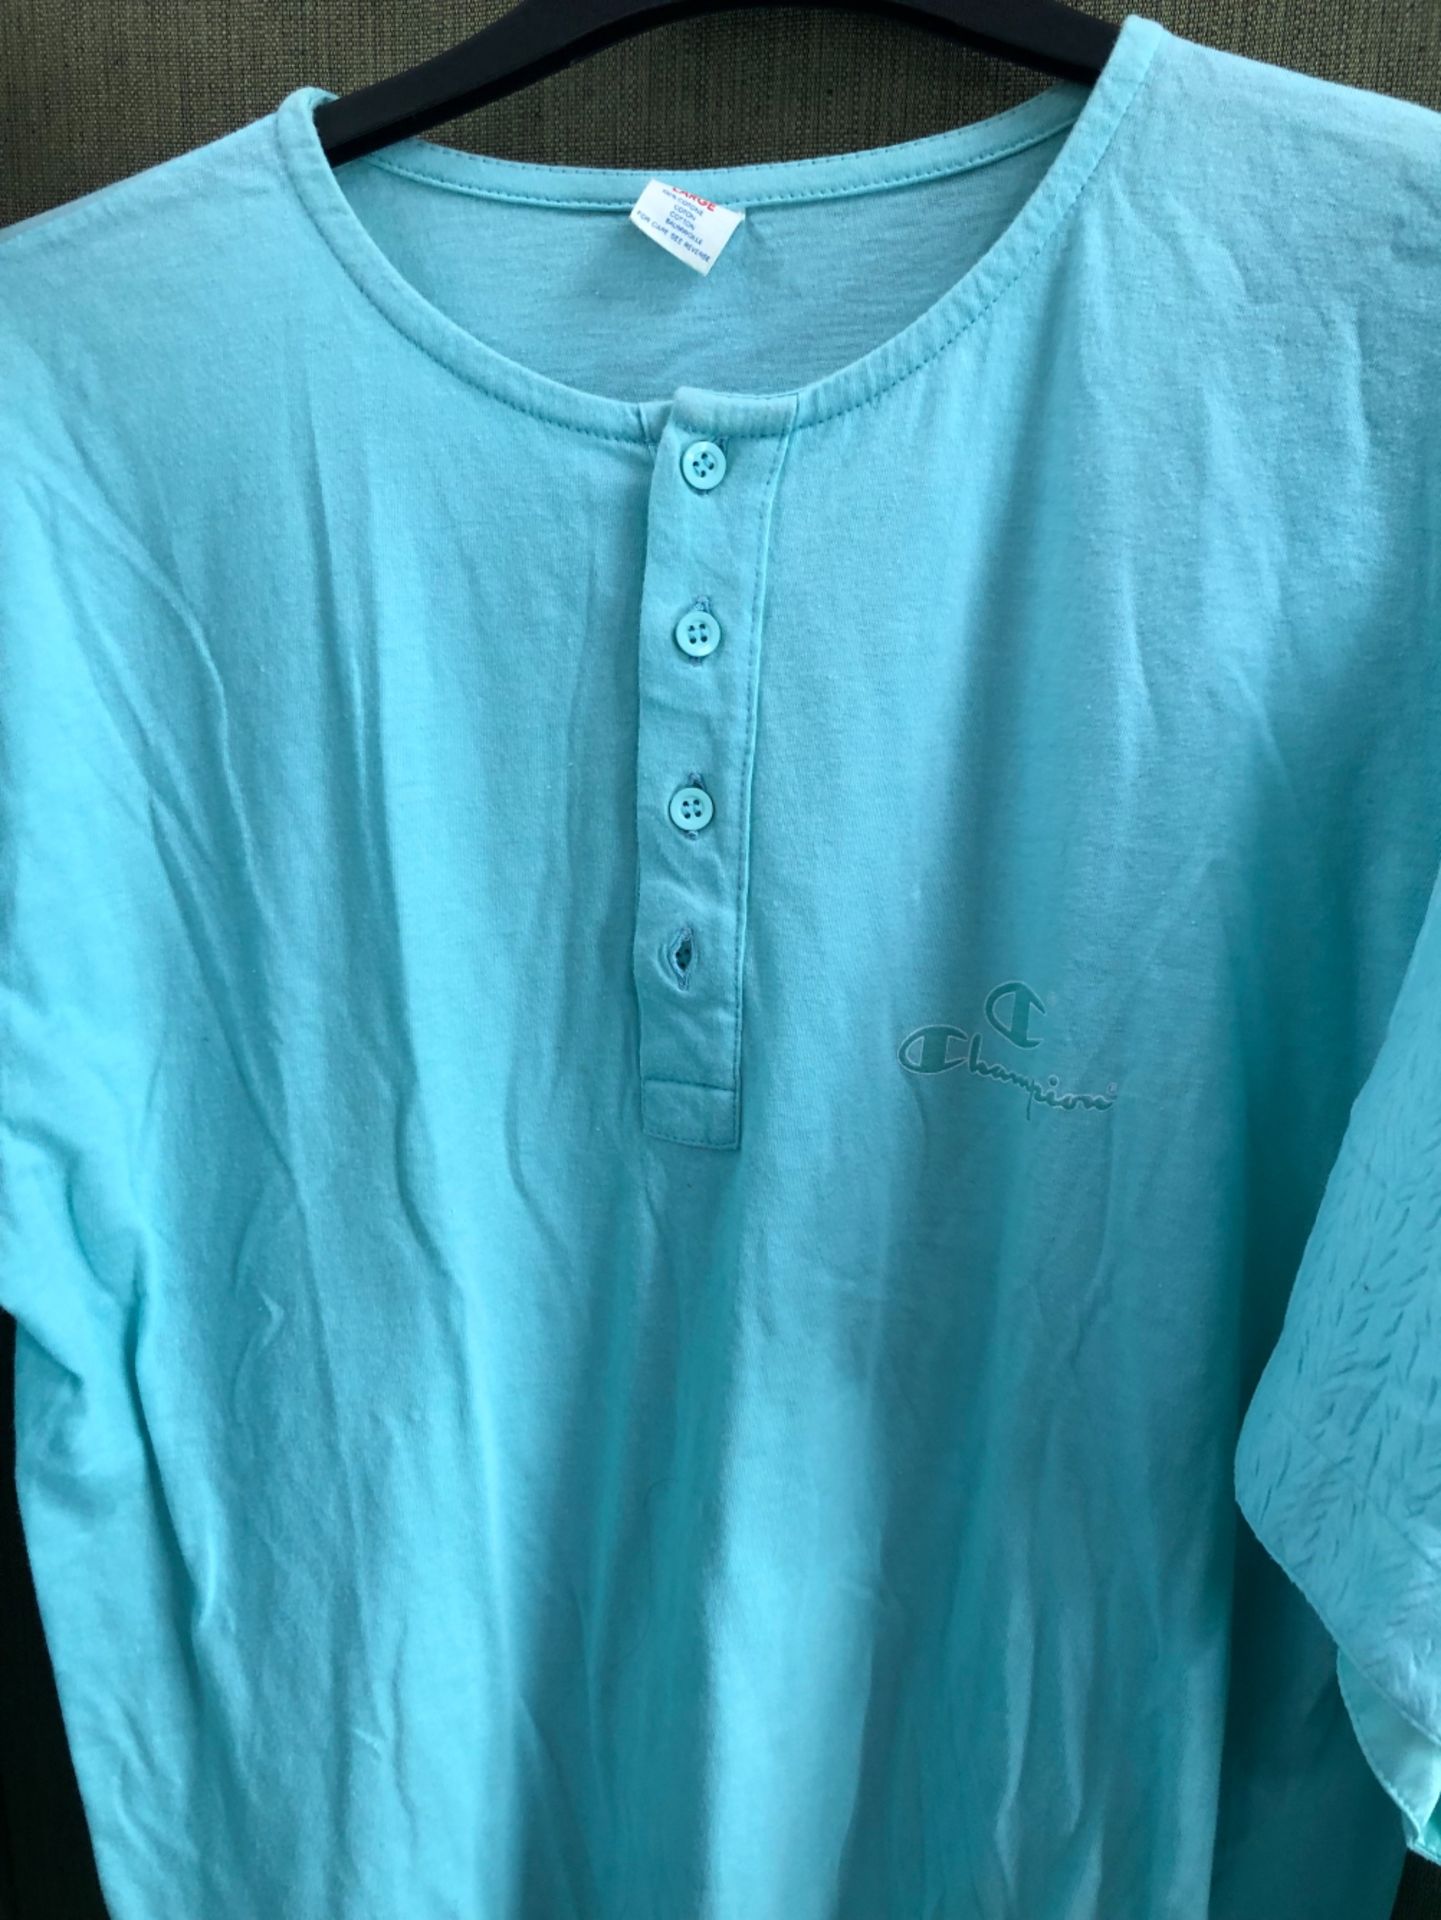 A MINT GREEN ELLESSE T-SHIRT SIZE USA 10W AND SHORTS USA 12, TOGETHER WITH A 100% COTTON MATCHING - Bild 2 aus 9